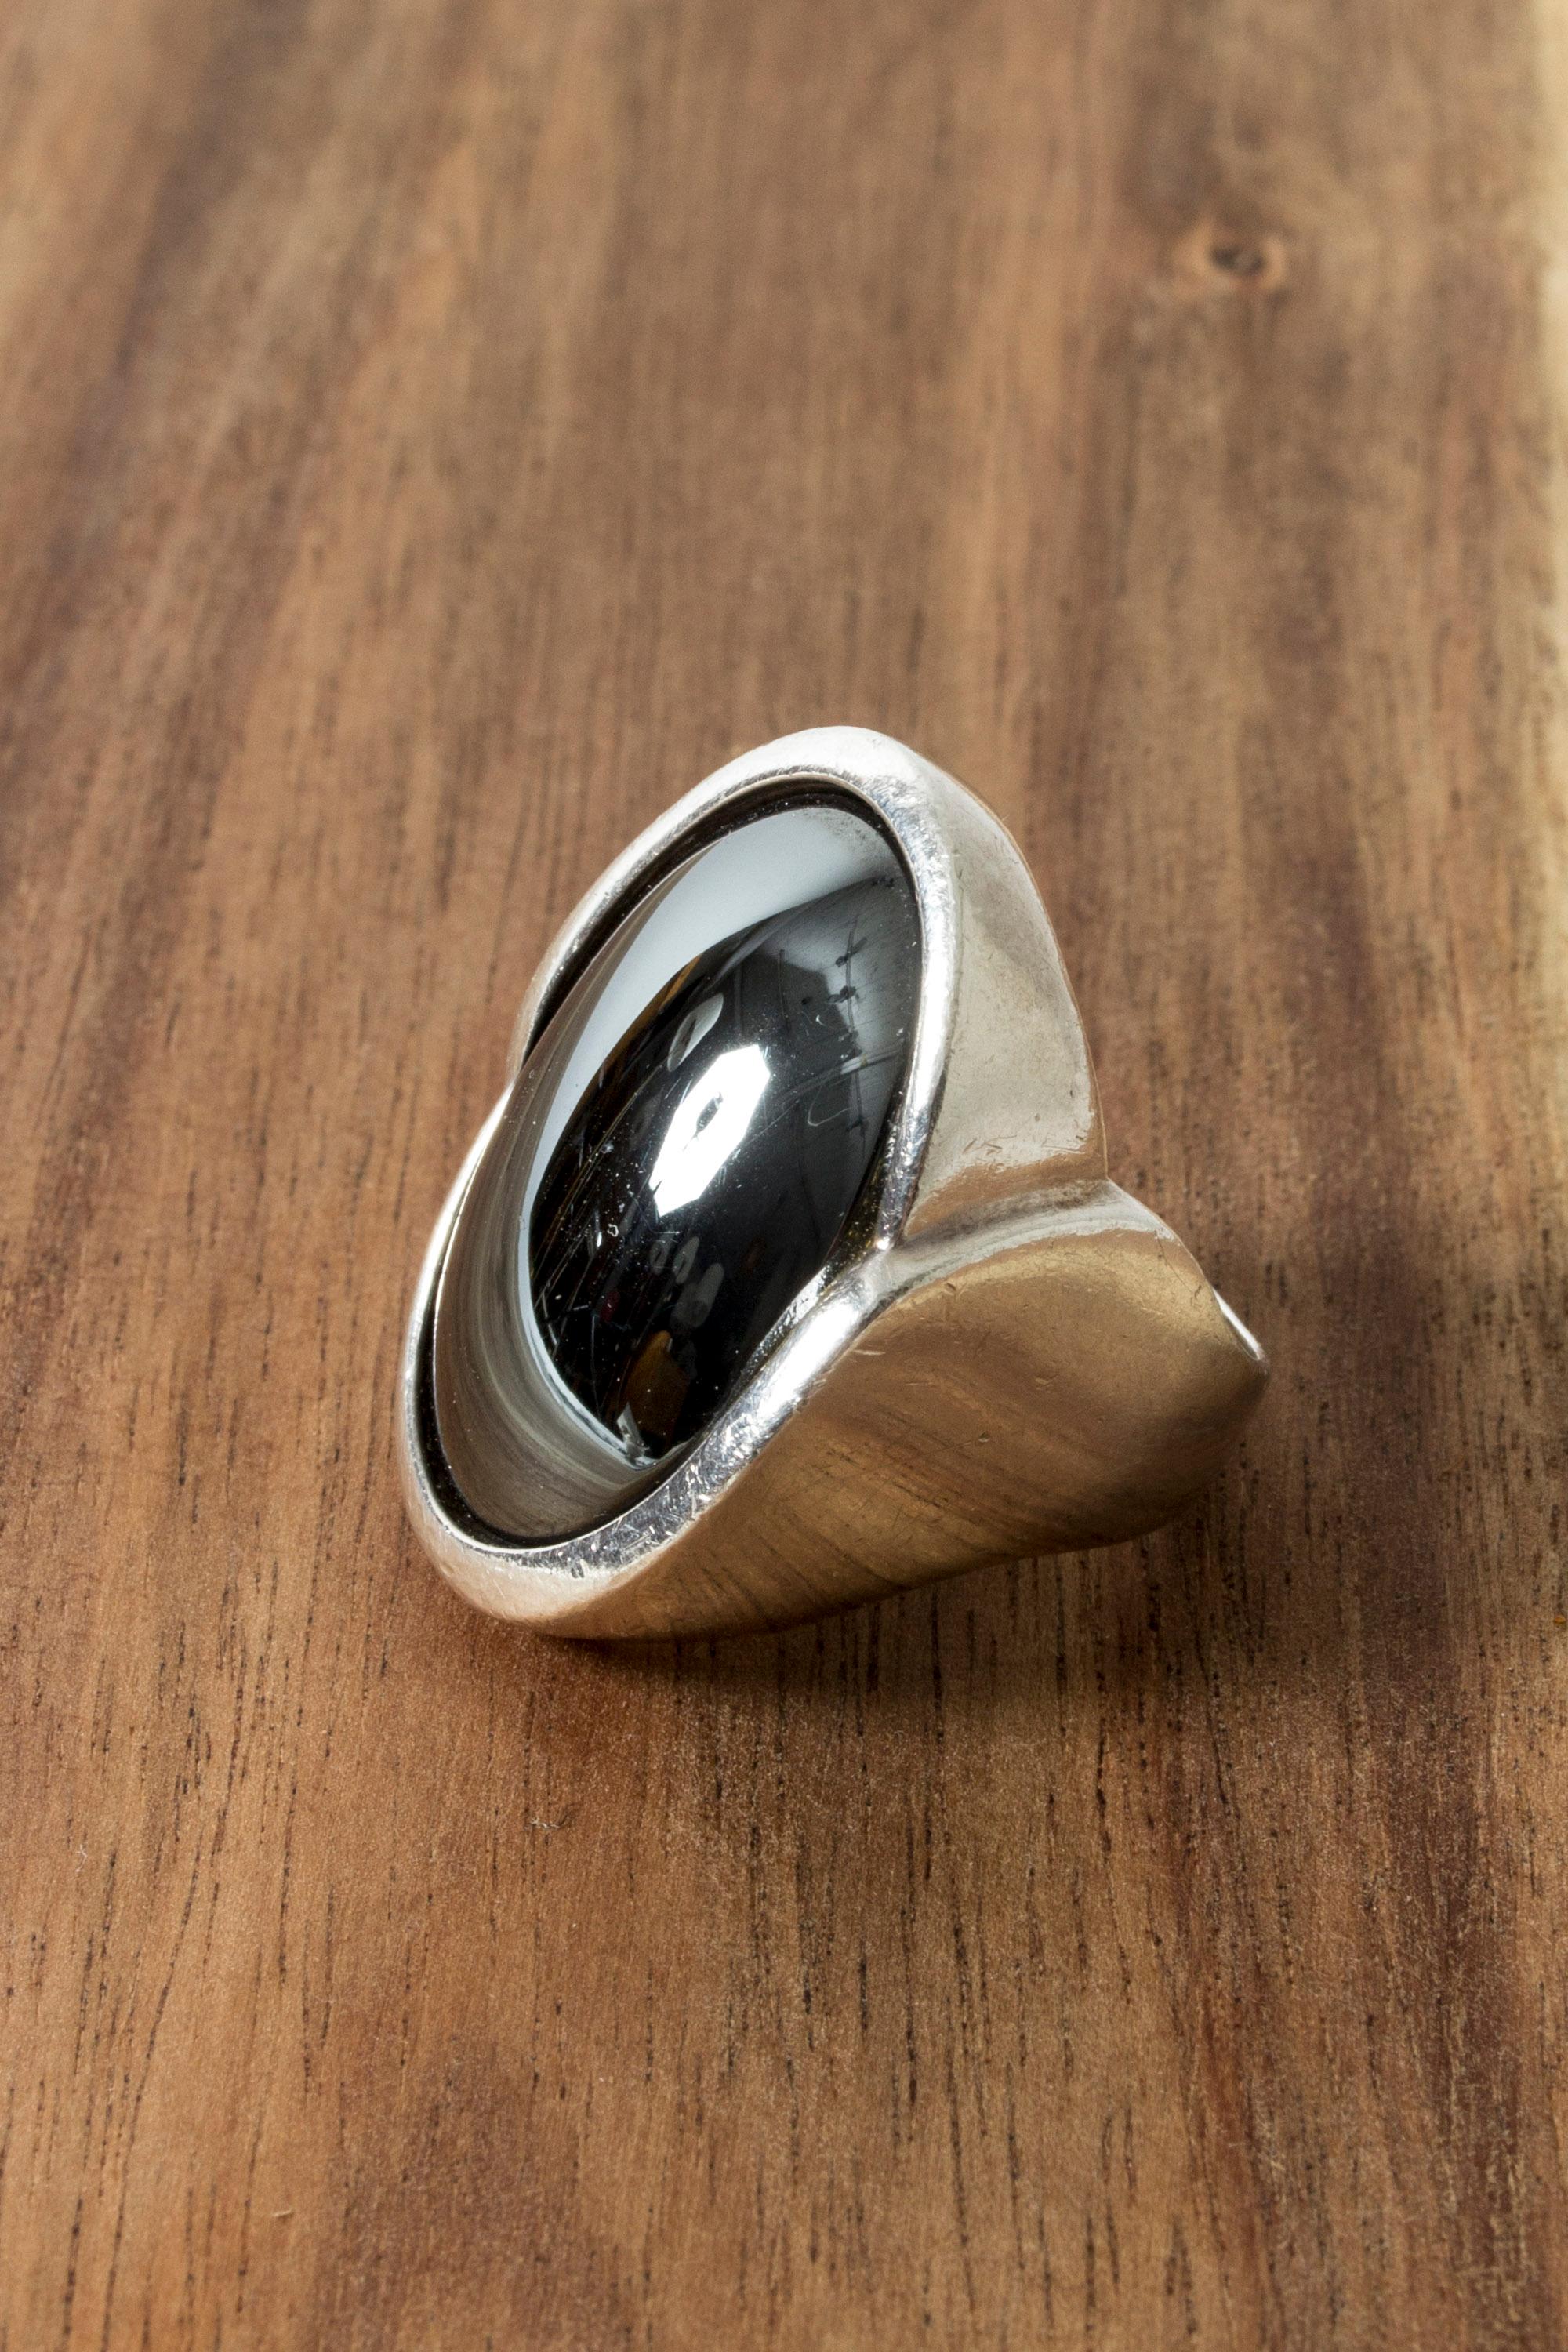 Very cool silver ring from Niels Erik From, with a large, oval hematite stone. Smooth, graphic lines, amazing metallic looking stone.